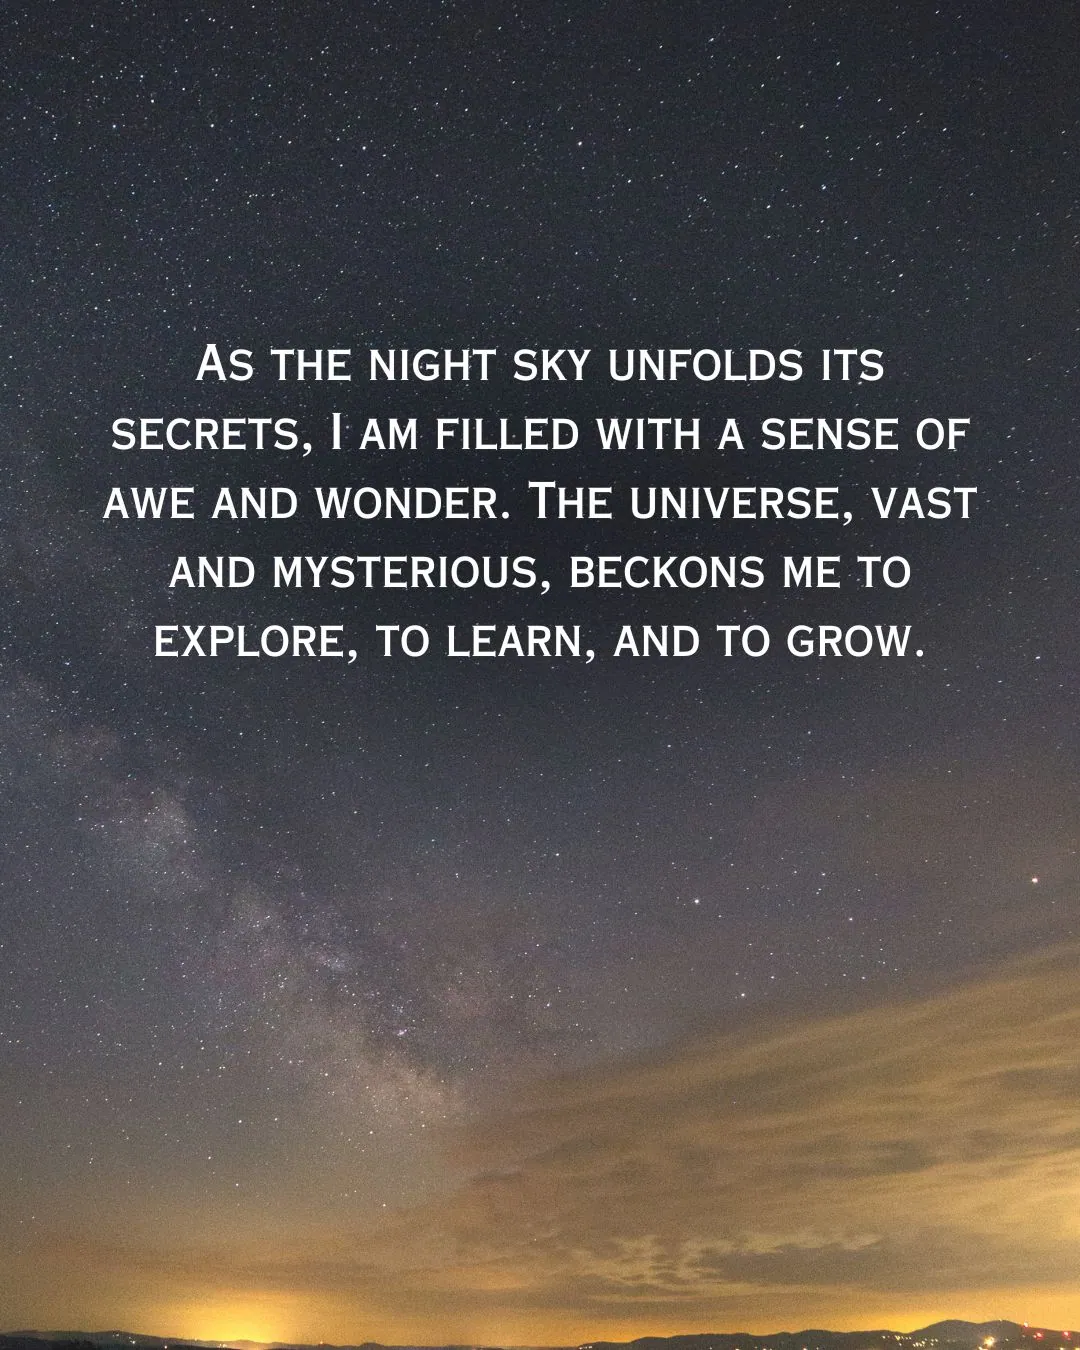 Night Sky Quotes for Instagram for Girl With Image 3